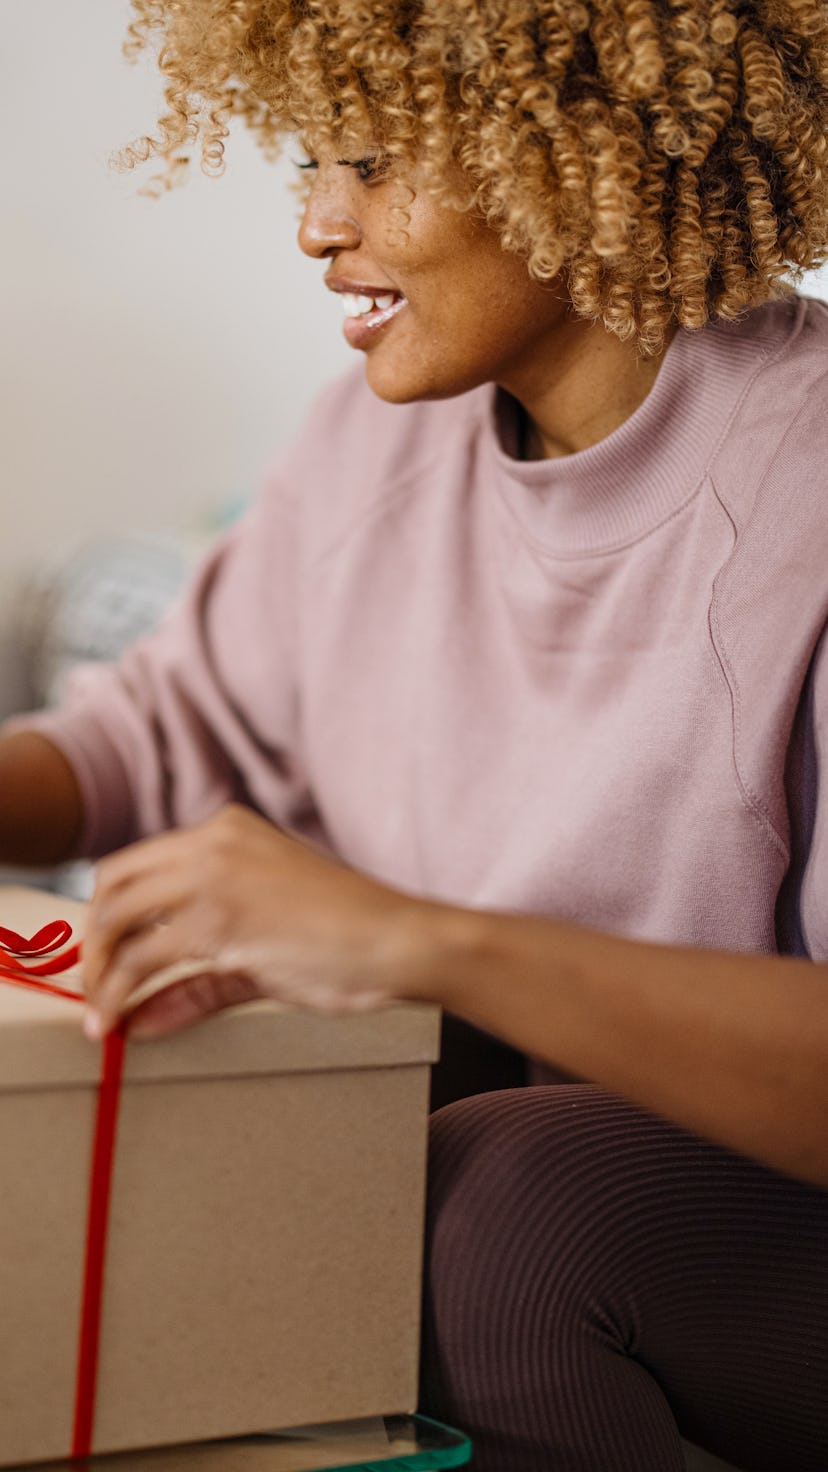 Woman wrapping Christmas presents in her home. Woman wrapping gift box in front of a Christmas tree